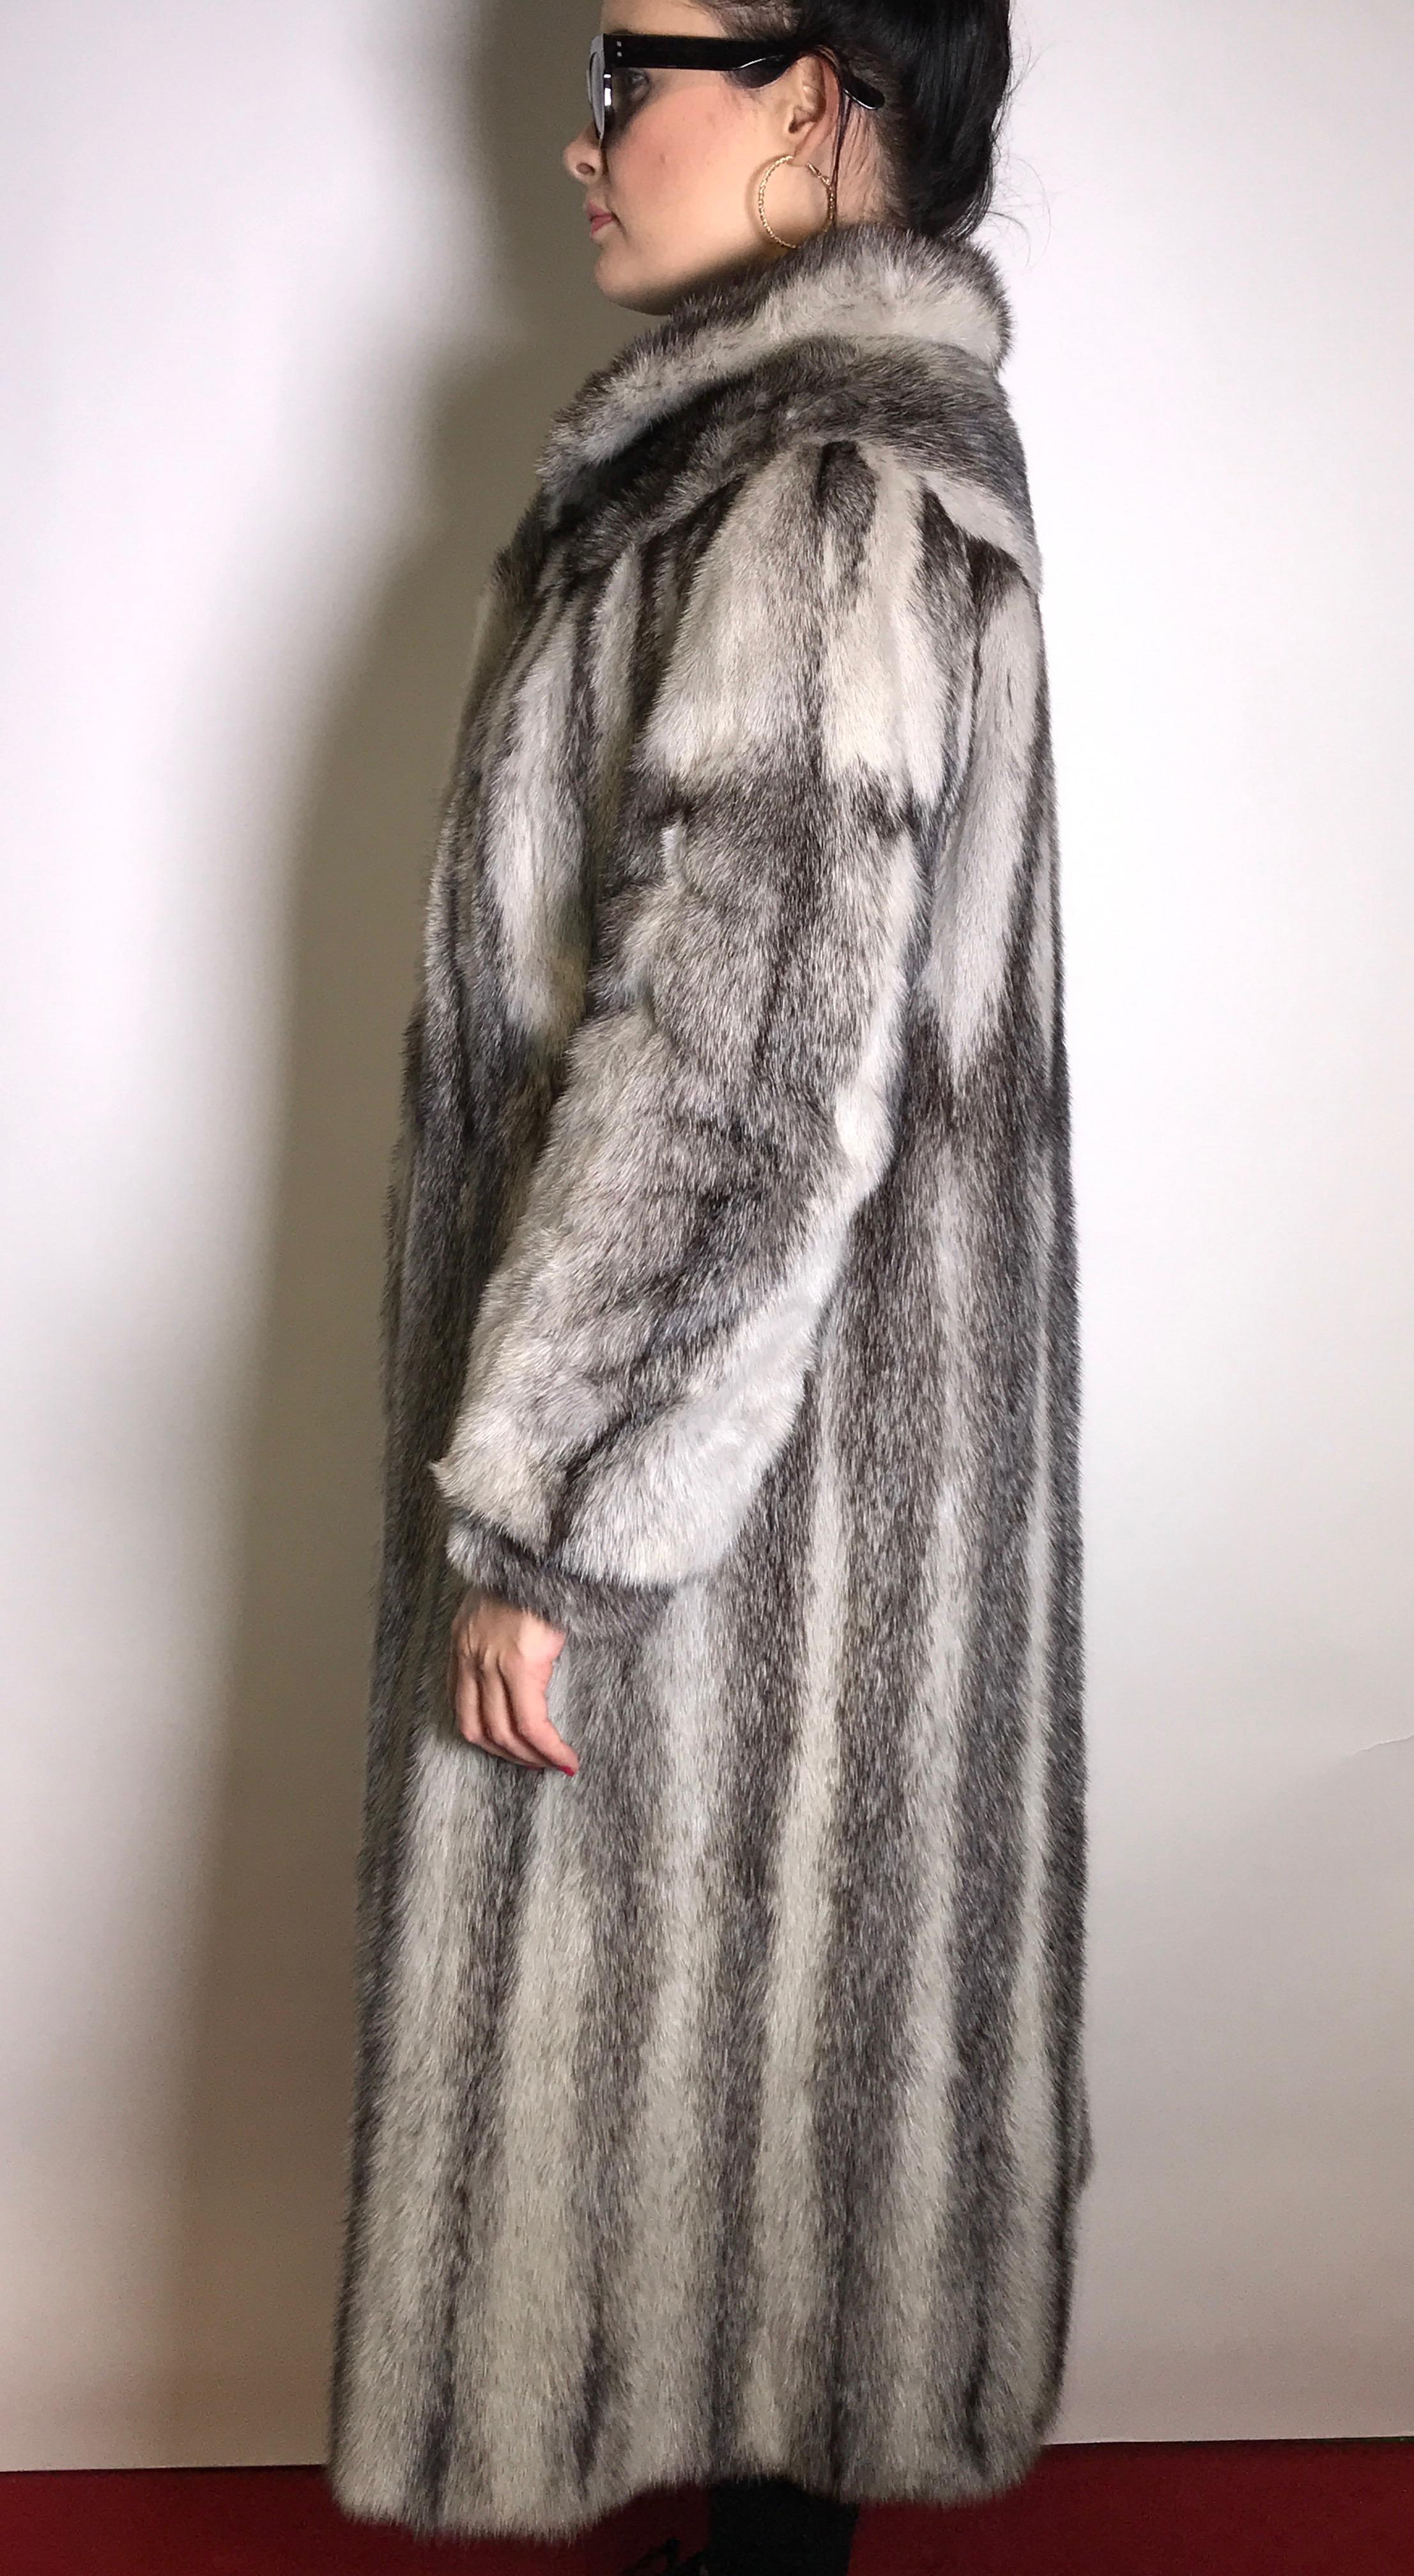 Beautiful long colored cross mink coat.
Exclusive SAGA MINK single piece made by the furrier.


Size EU: 36 - 38 / S - M
Total length: 117 cm
Shoulder width: 43 cm
Sleeve length: 51 cm

The coat is in excellent condition, almost never worn.

- Our